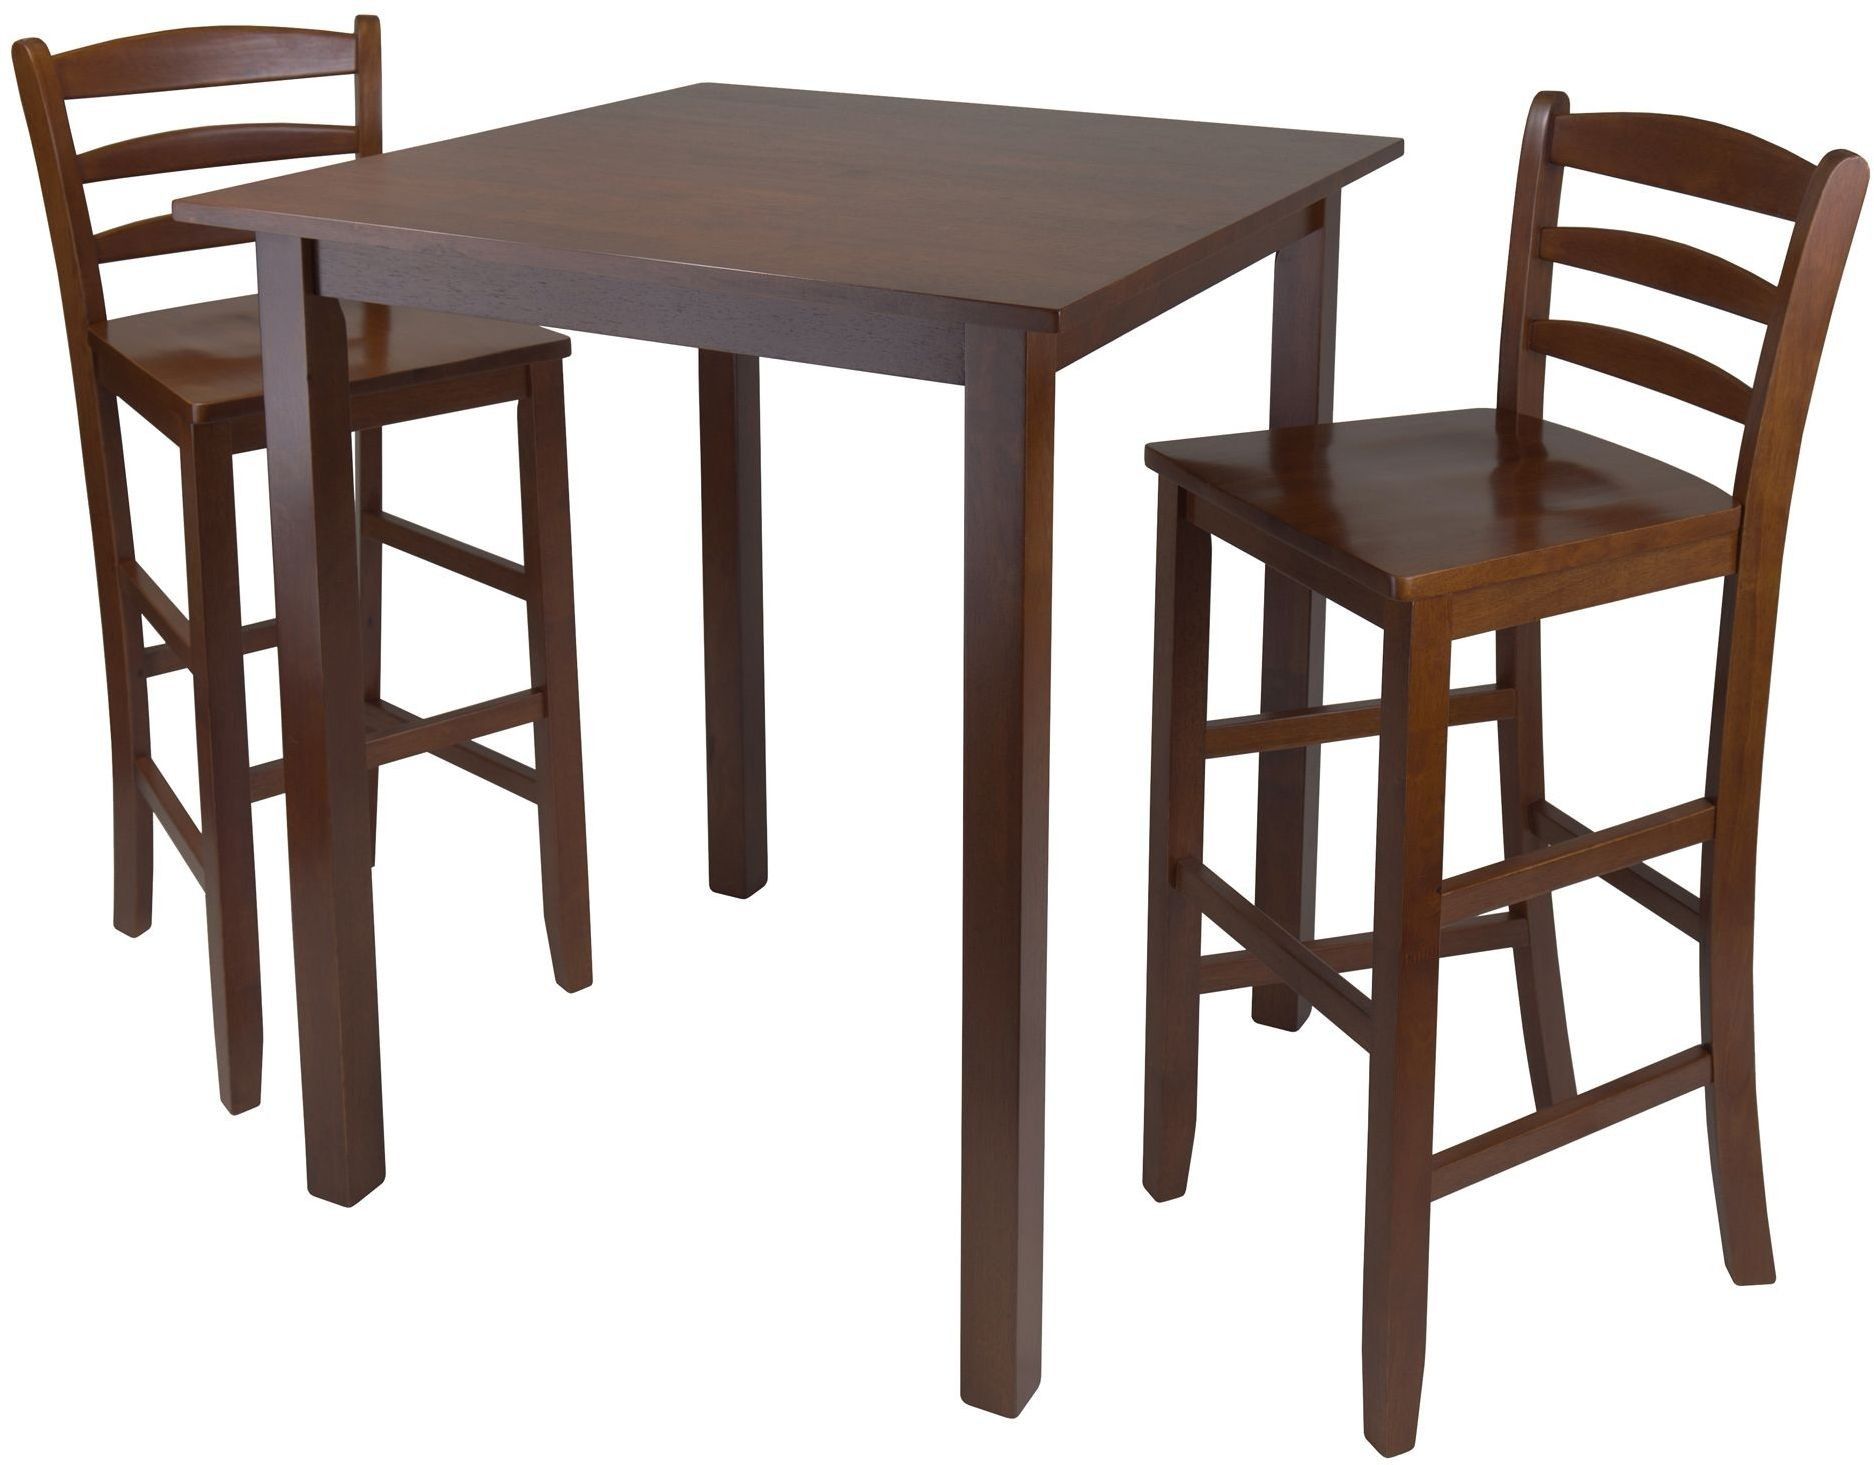 Parkland Walnut 3 Piece Counter Height Dining Set With Ladder Back Bar Regarding 3 Piece Bistro Dining Sets (View 10 of 15)